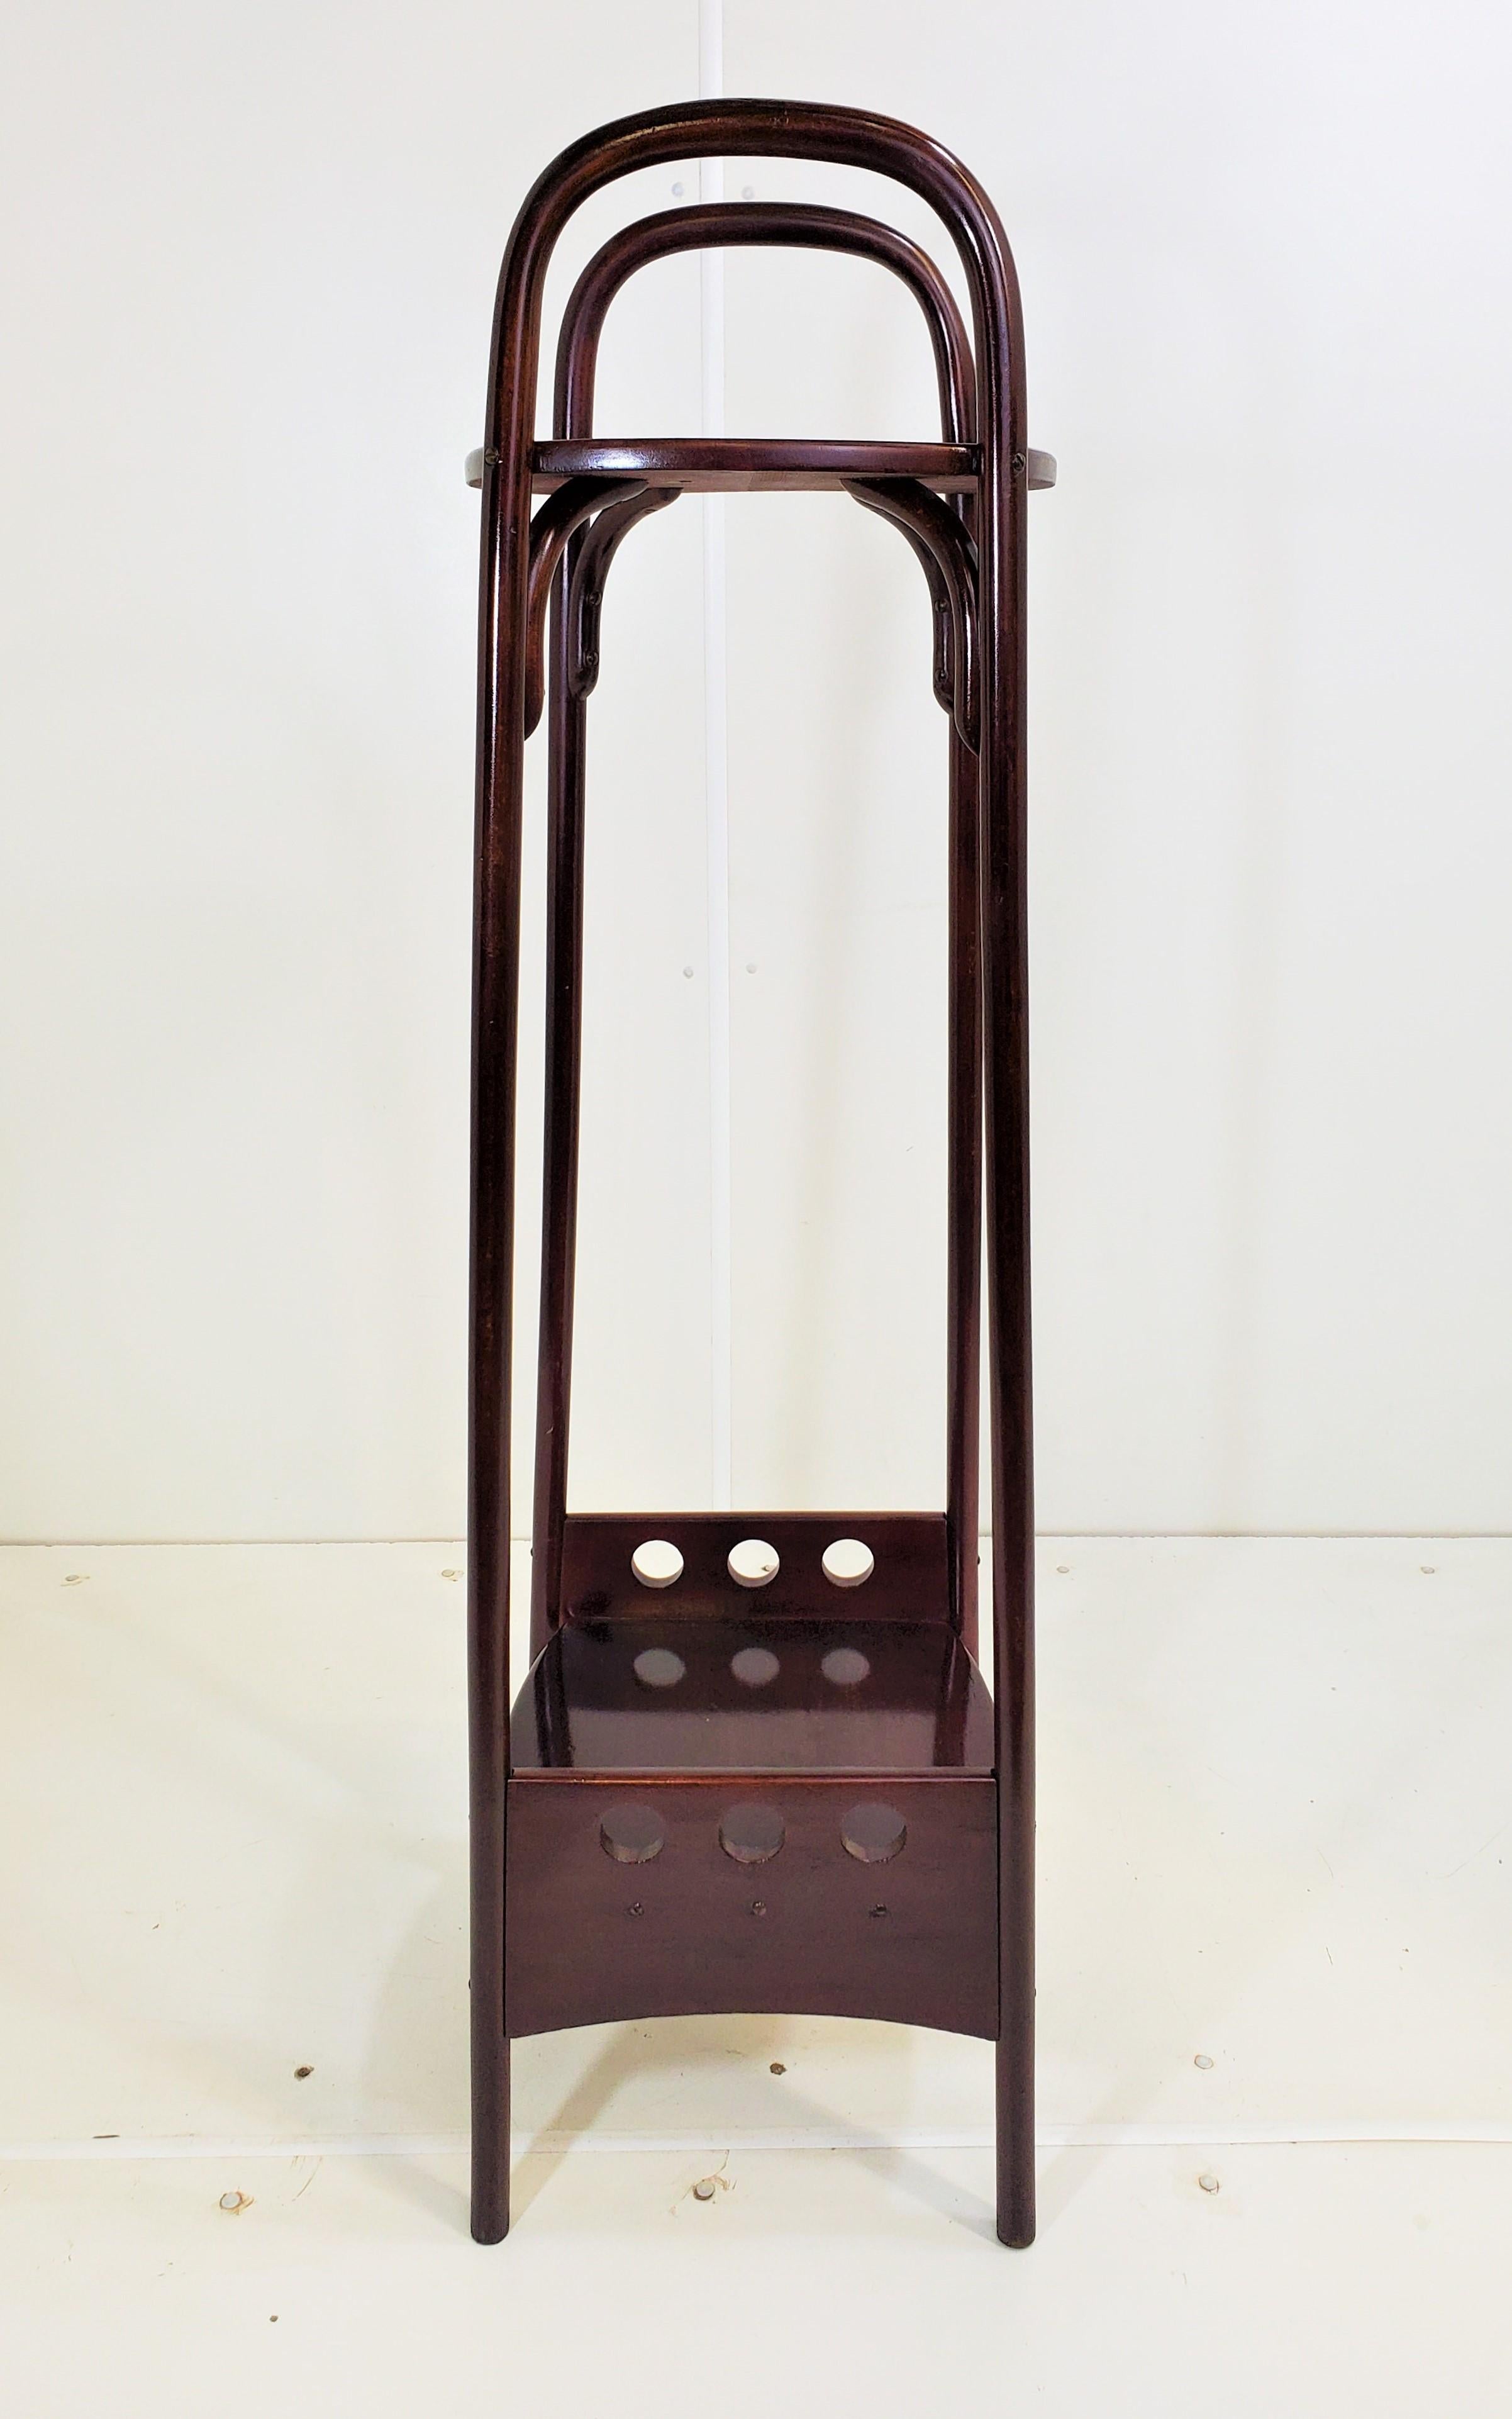 Josef Hoffman (designer) & Thonet (manufacturer) (1870-1956)
Plant holder in stained and polished beechwood with double curved arms extending the full length of the stand and culminating in a stretcher shelf with decorative openwork surround